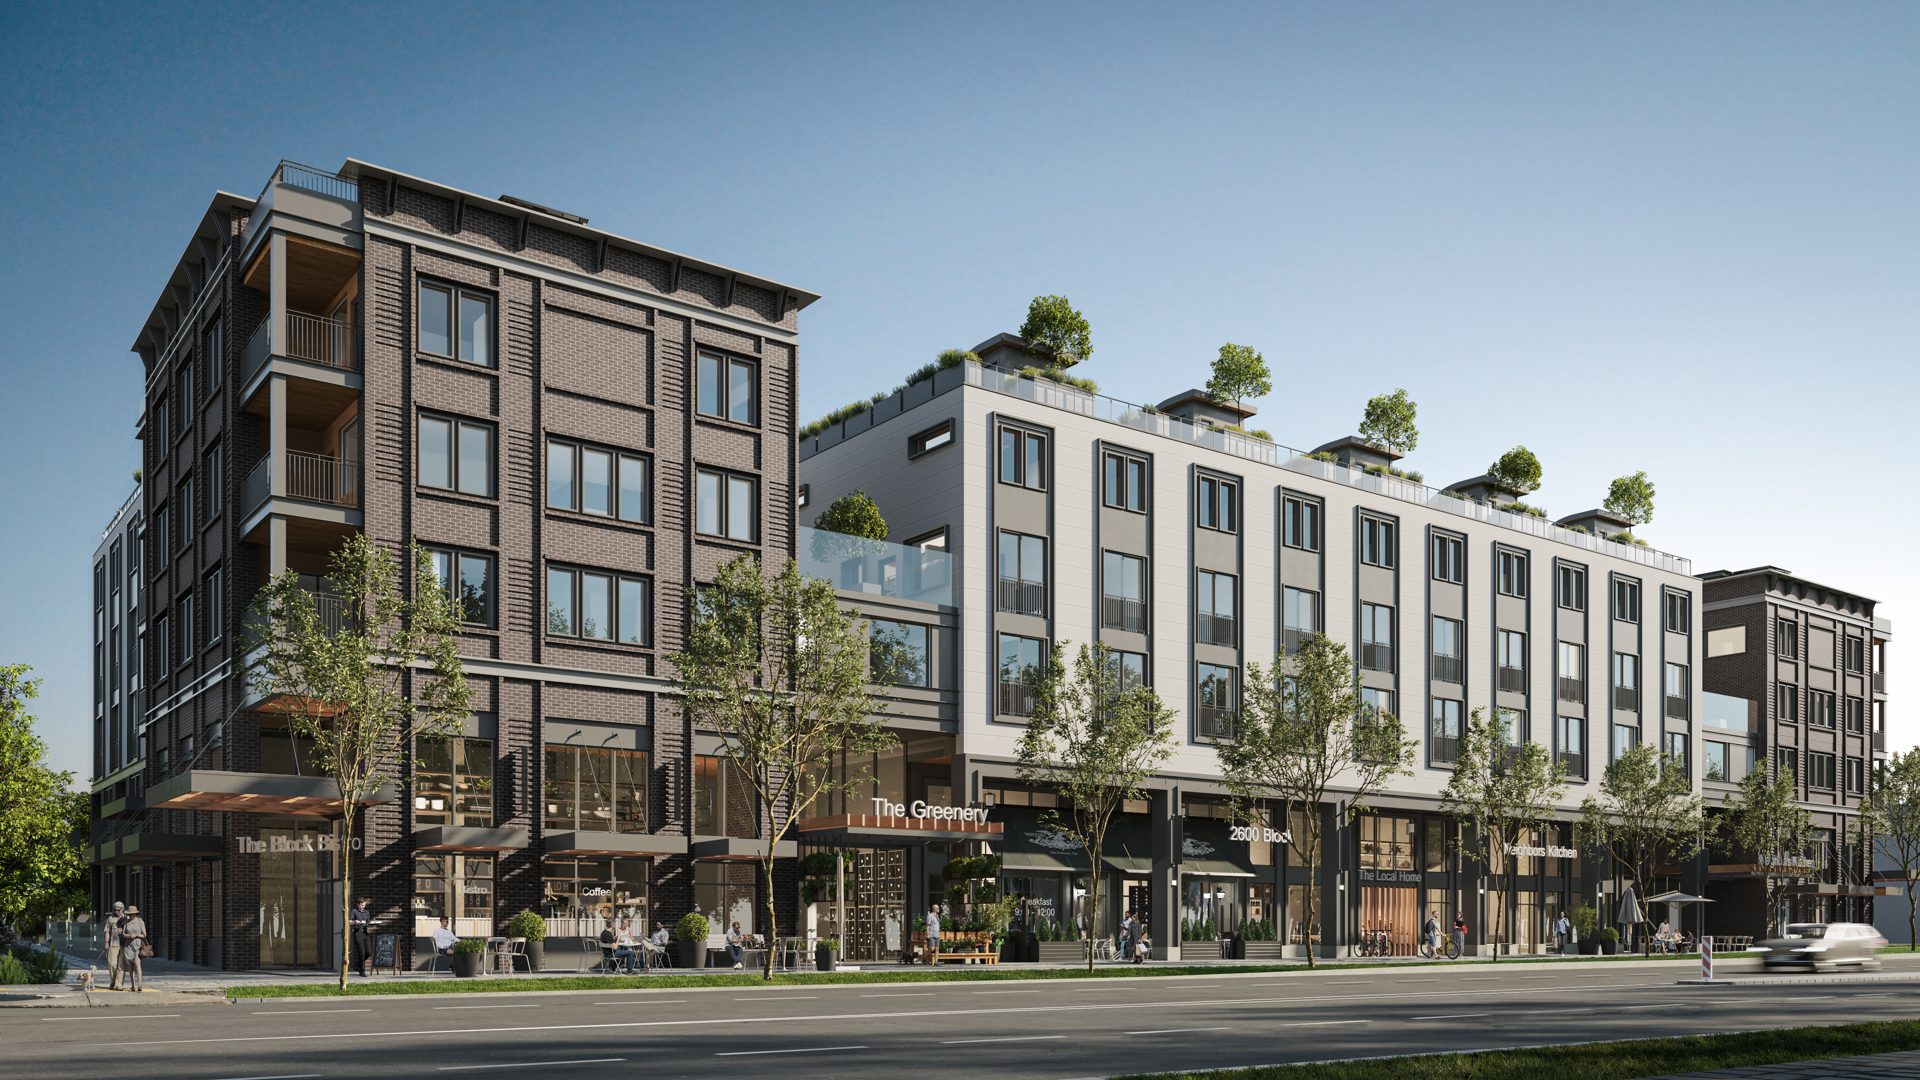 A 5-storey, mixed-use building consisting of ground-level retail, condominiums, and townhomes.